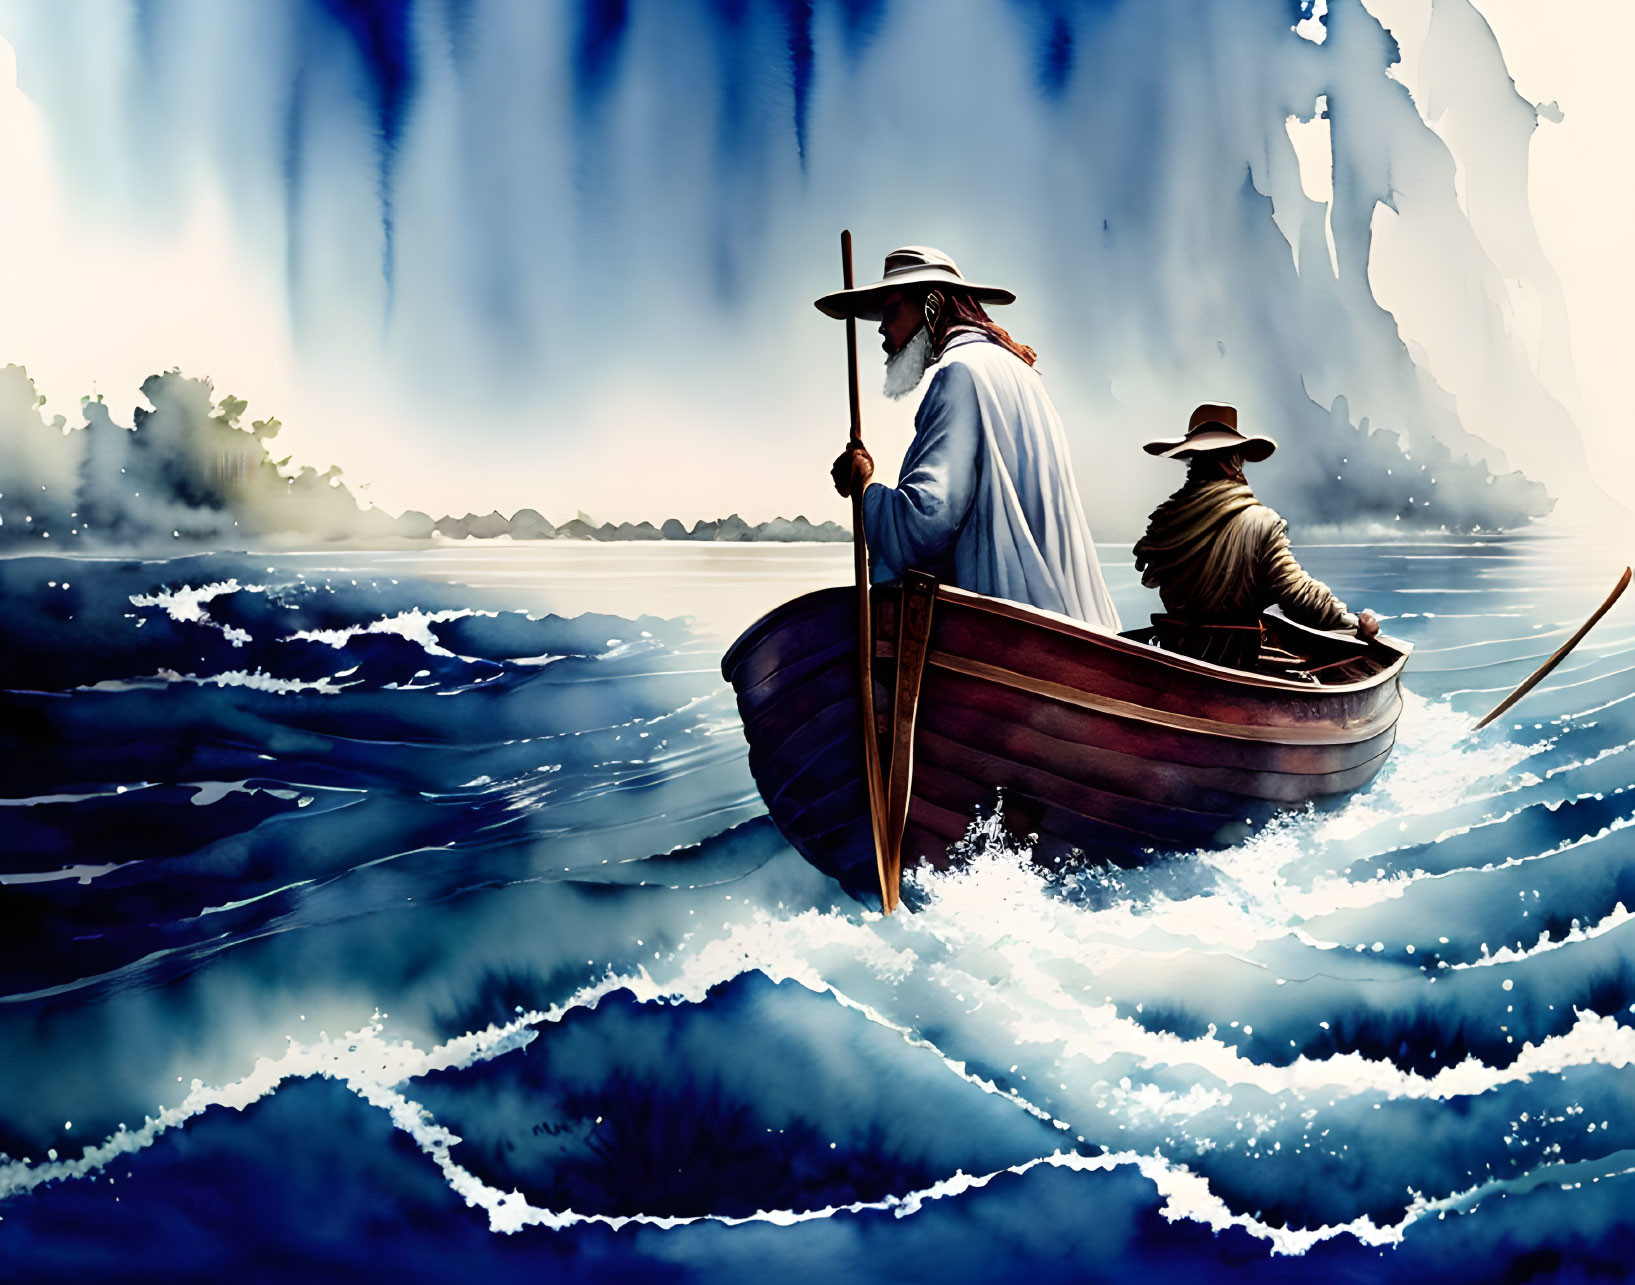 Ancient individuals in wooden boat on choppy waters with misty waterfall